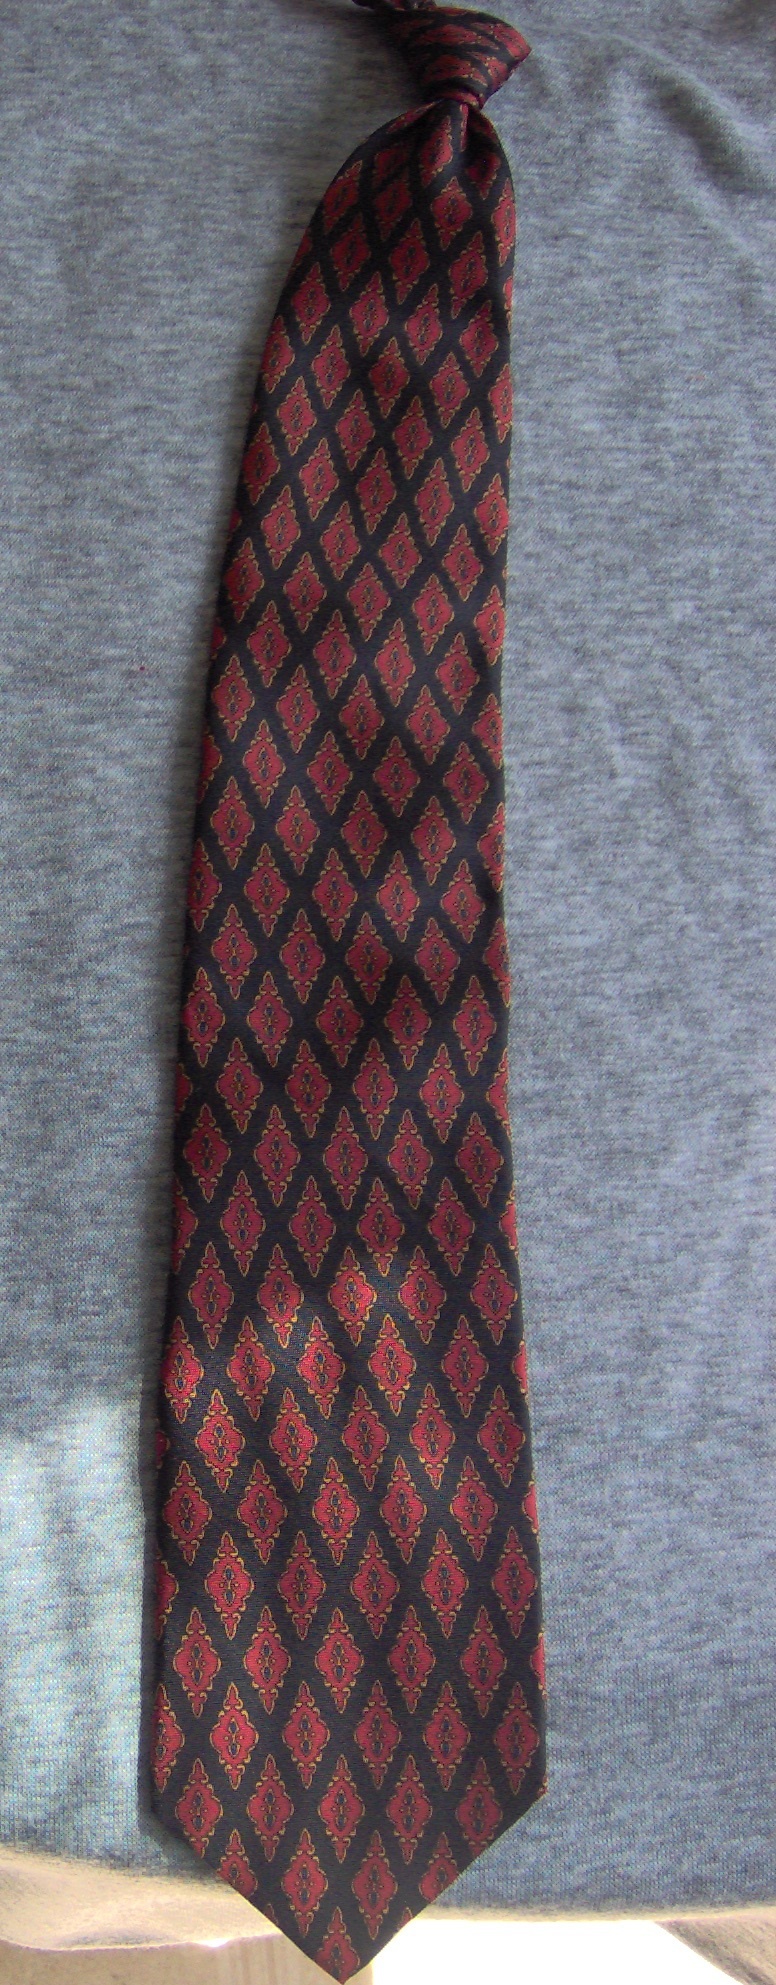 Red and black Necktie-TI 7221- Ornate diamond shapes – Costume Cottage